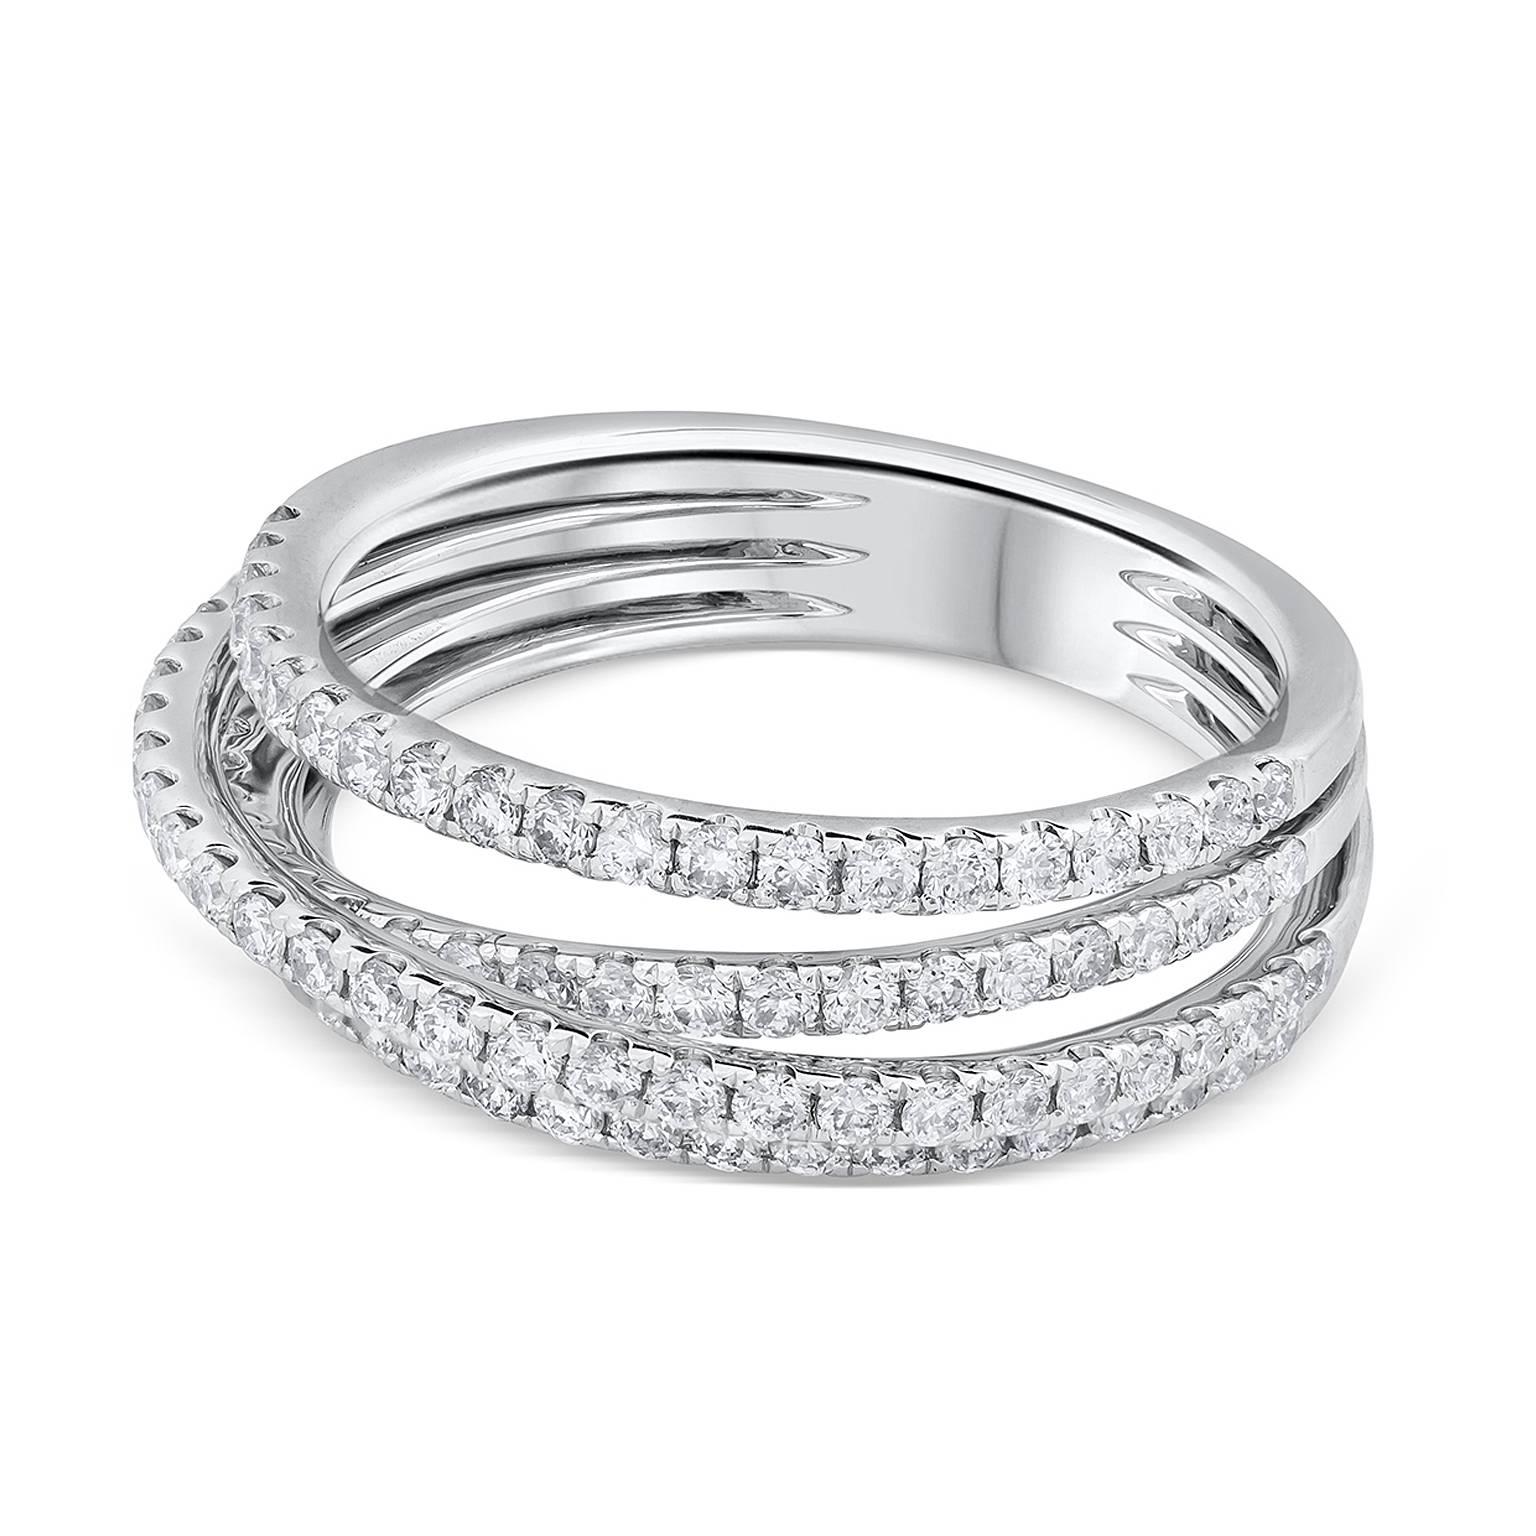 A unique and distinct 14k white gold ring featuring 4 rows of dazzling diamonds weighing 0.92 carats total. The middle rows elegantly entwine in the middle as each row gradually connects as one at the back. Size 6.75 US. Has a 6.62 millimeter